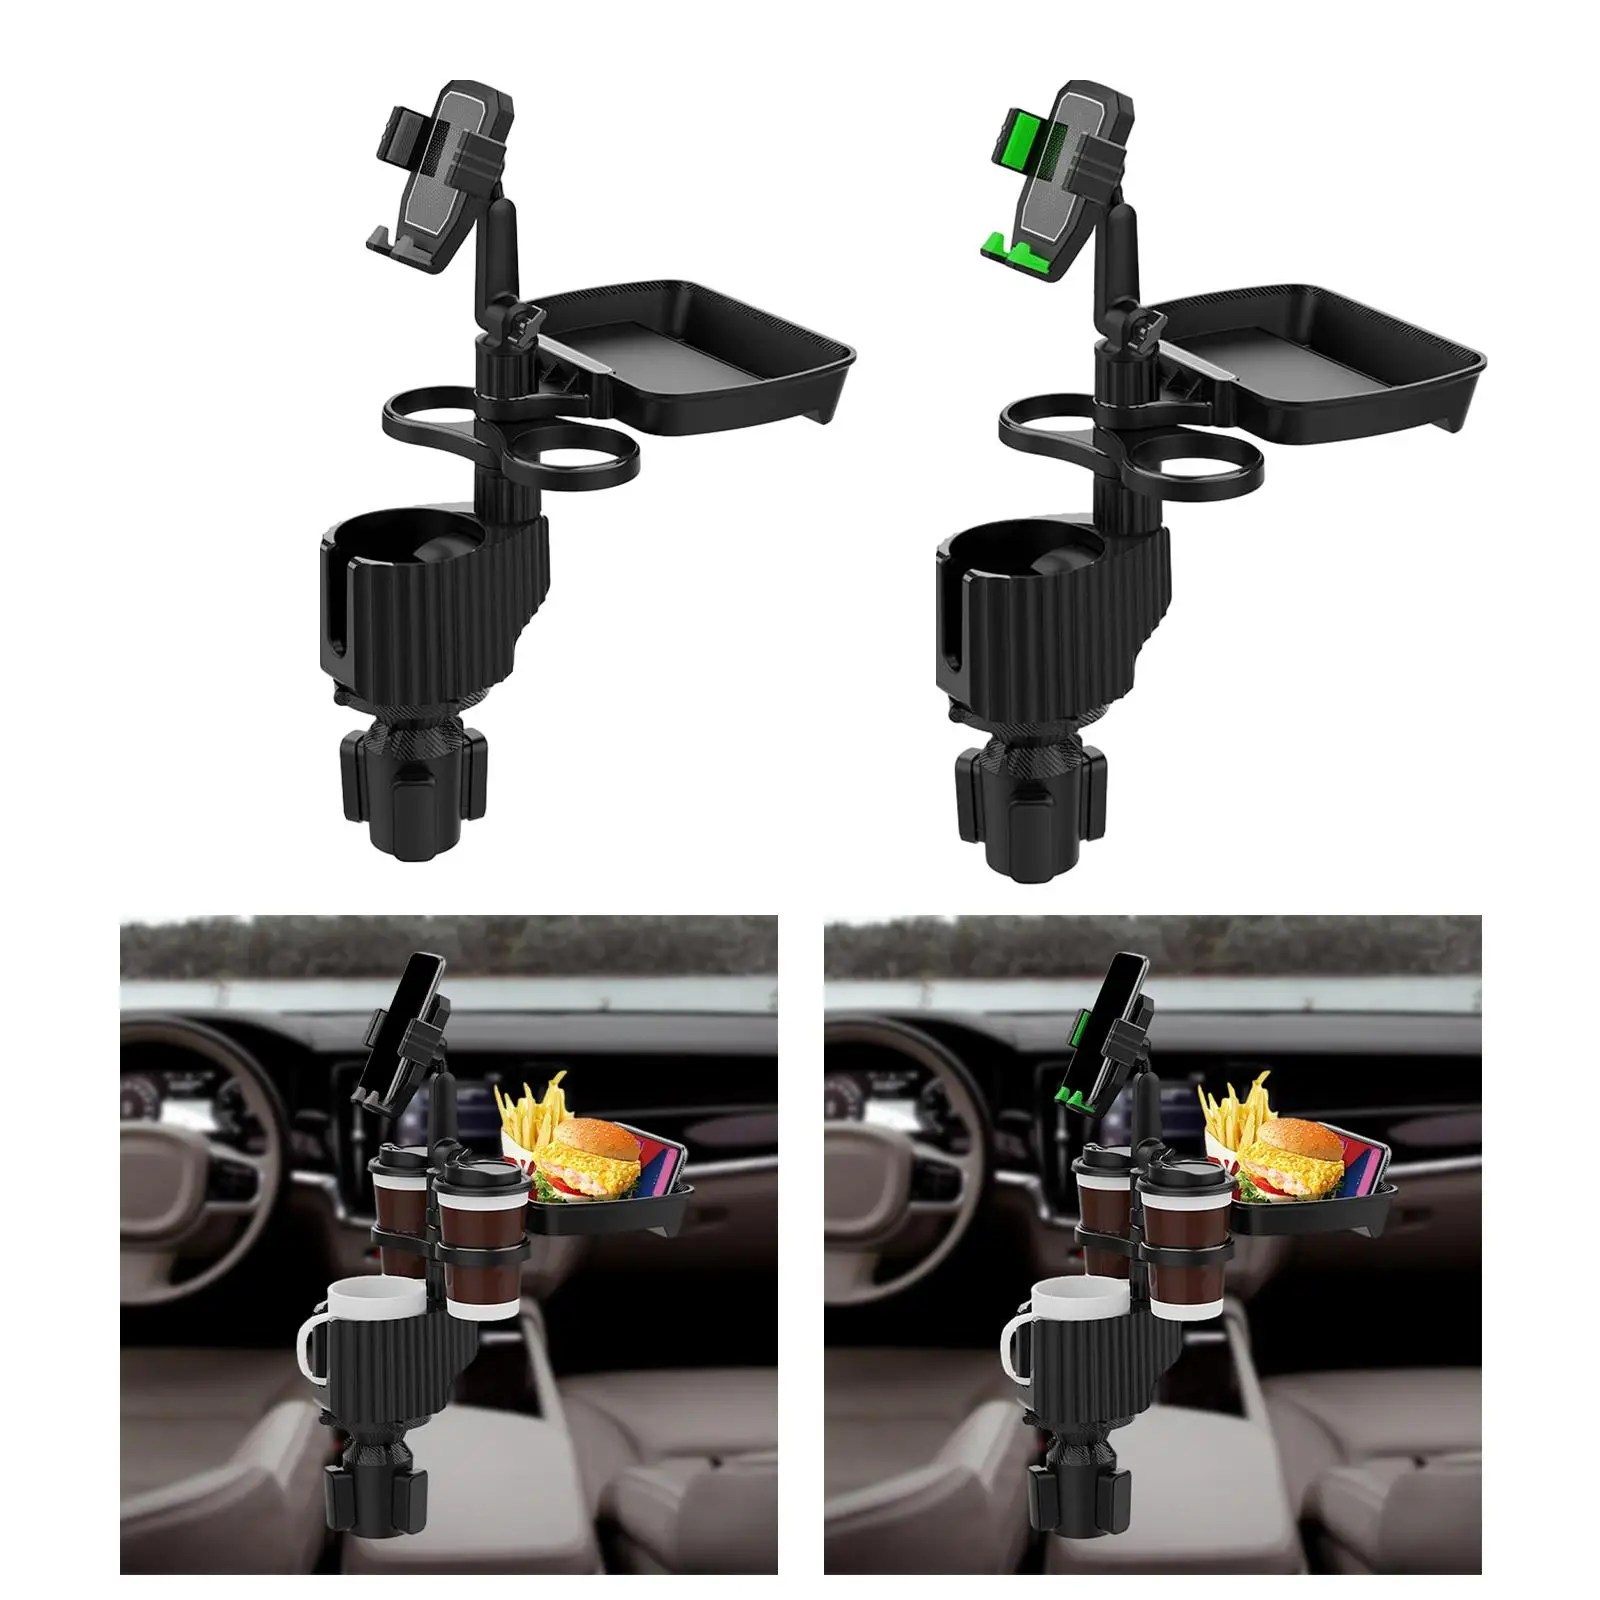 Cup Holder Expander for Car with Double Cup Holder Cup Holder Tray for Car